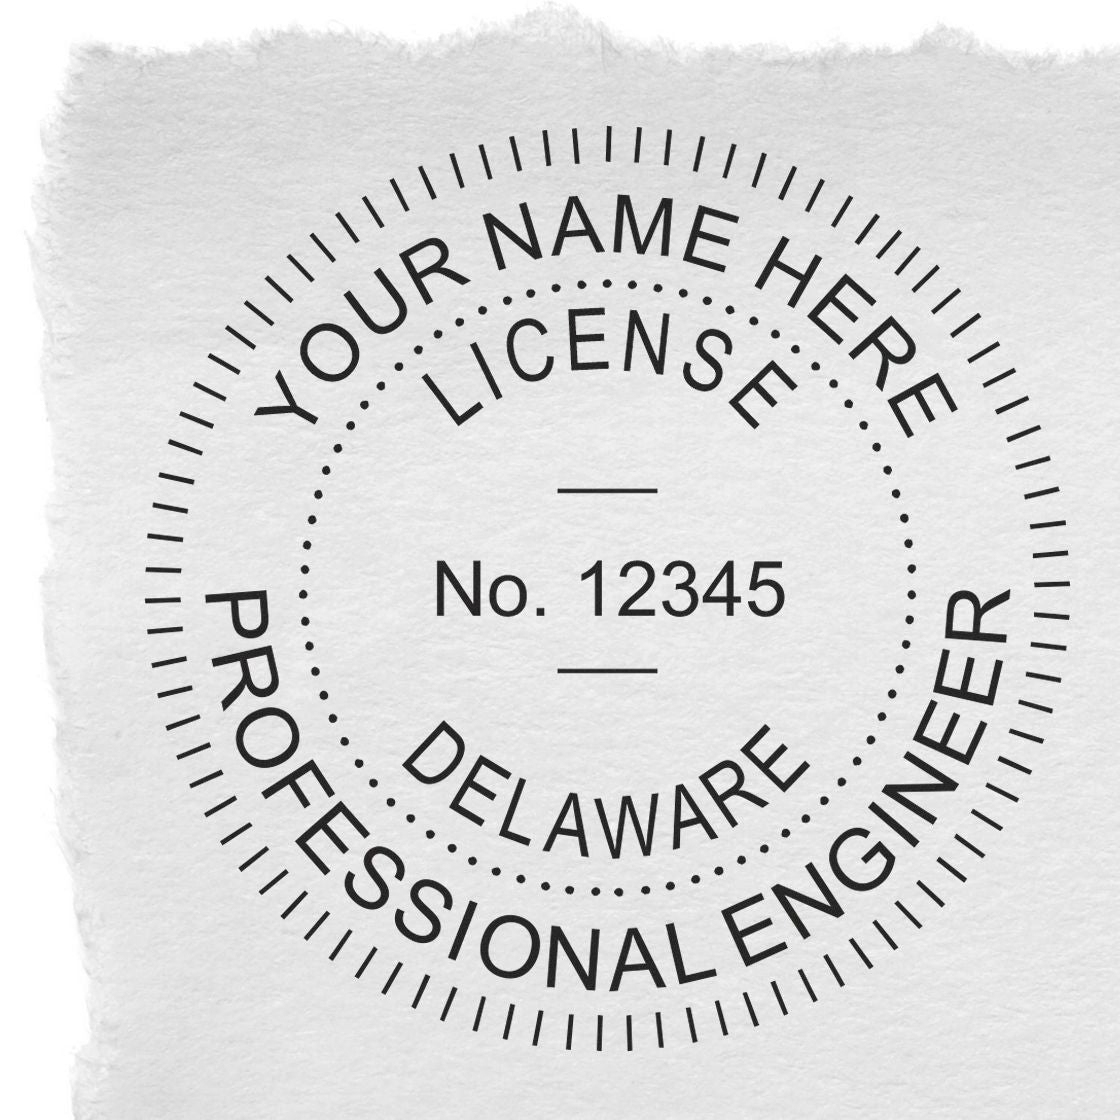 A stamped impression of the Digital Delaware PE Stamp and Electronic Seal for Delaware Engineer in this stylish lifestyle photo, setting the tone for a unique and personalized product.